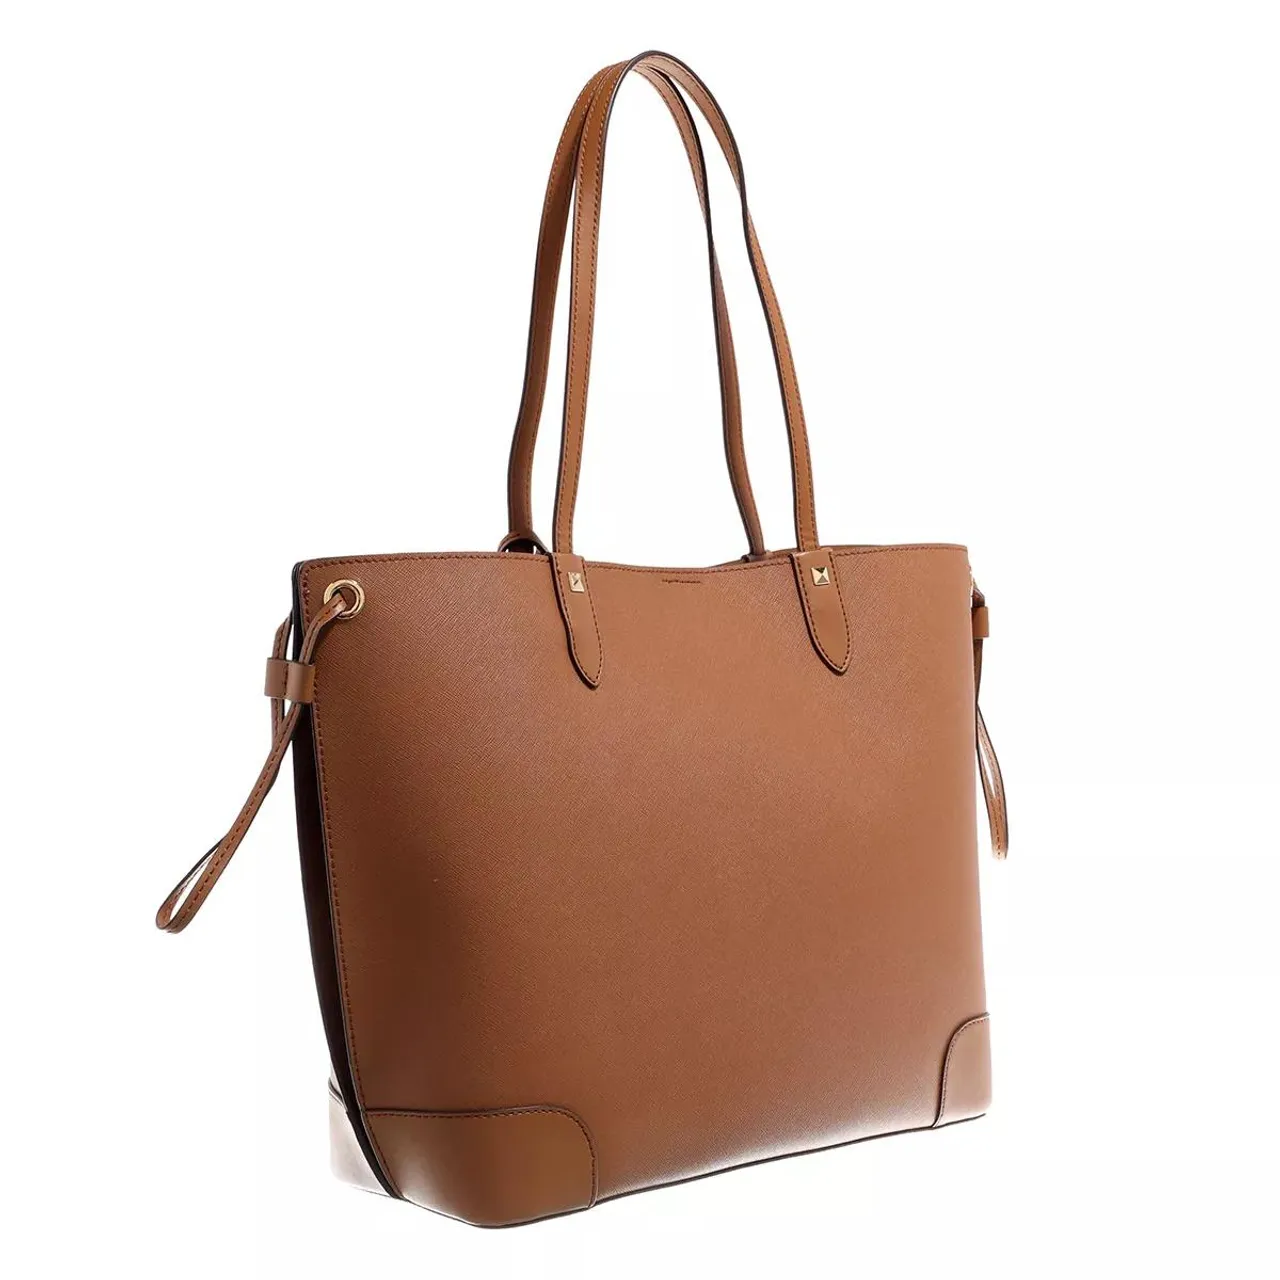 Michael Kors Tote Bags - Double Sided Saffiano Backing - cognac - Tote Bags for ladies